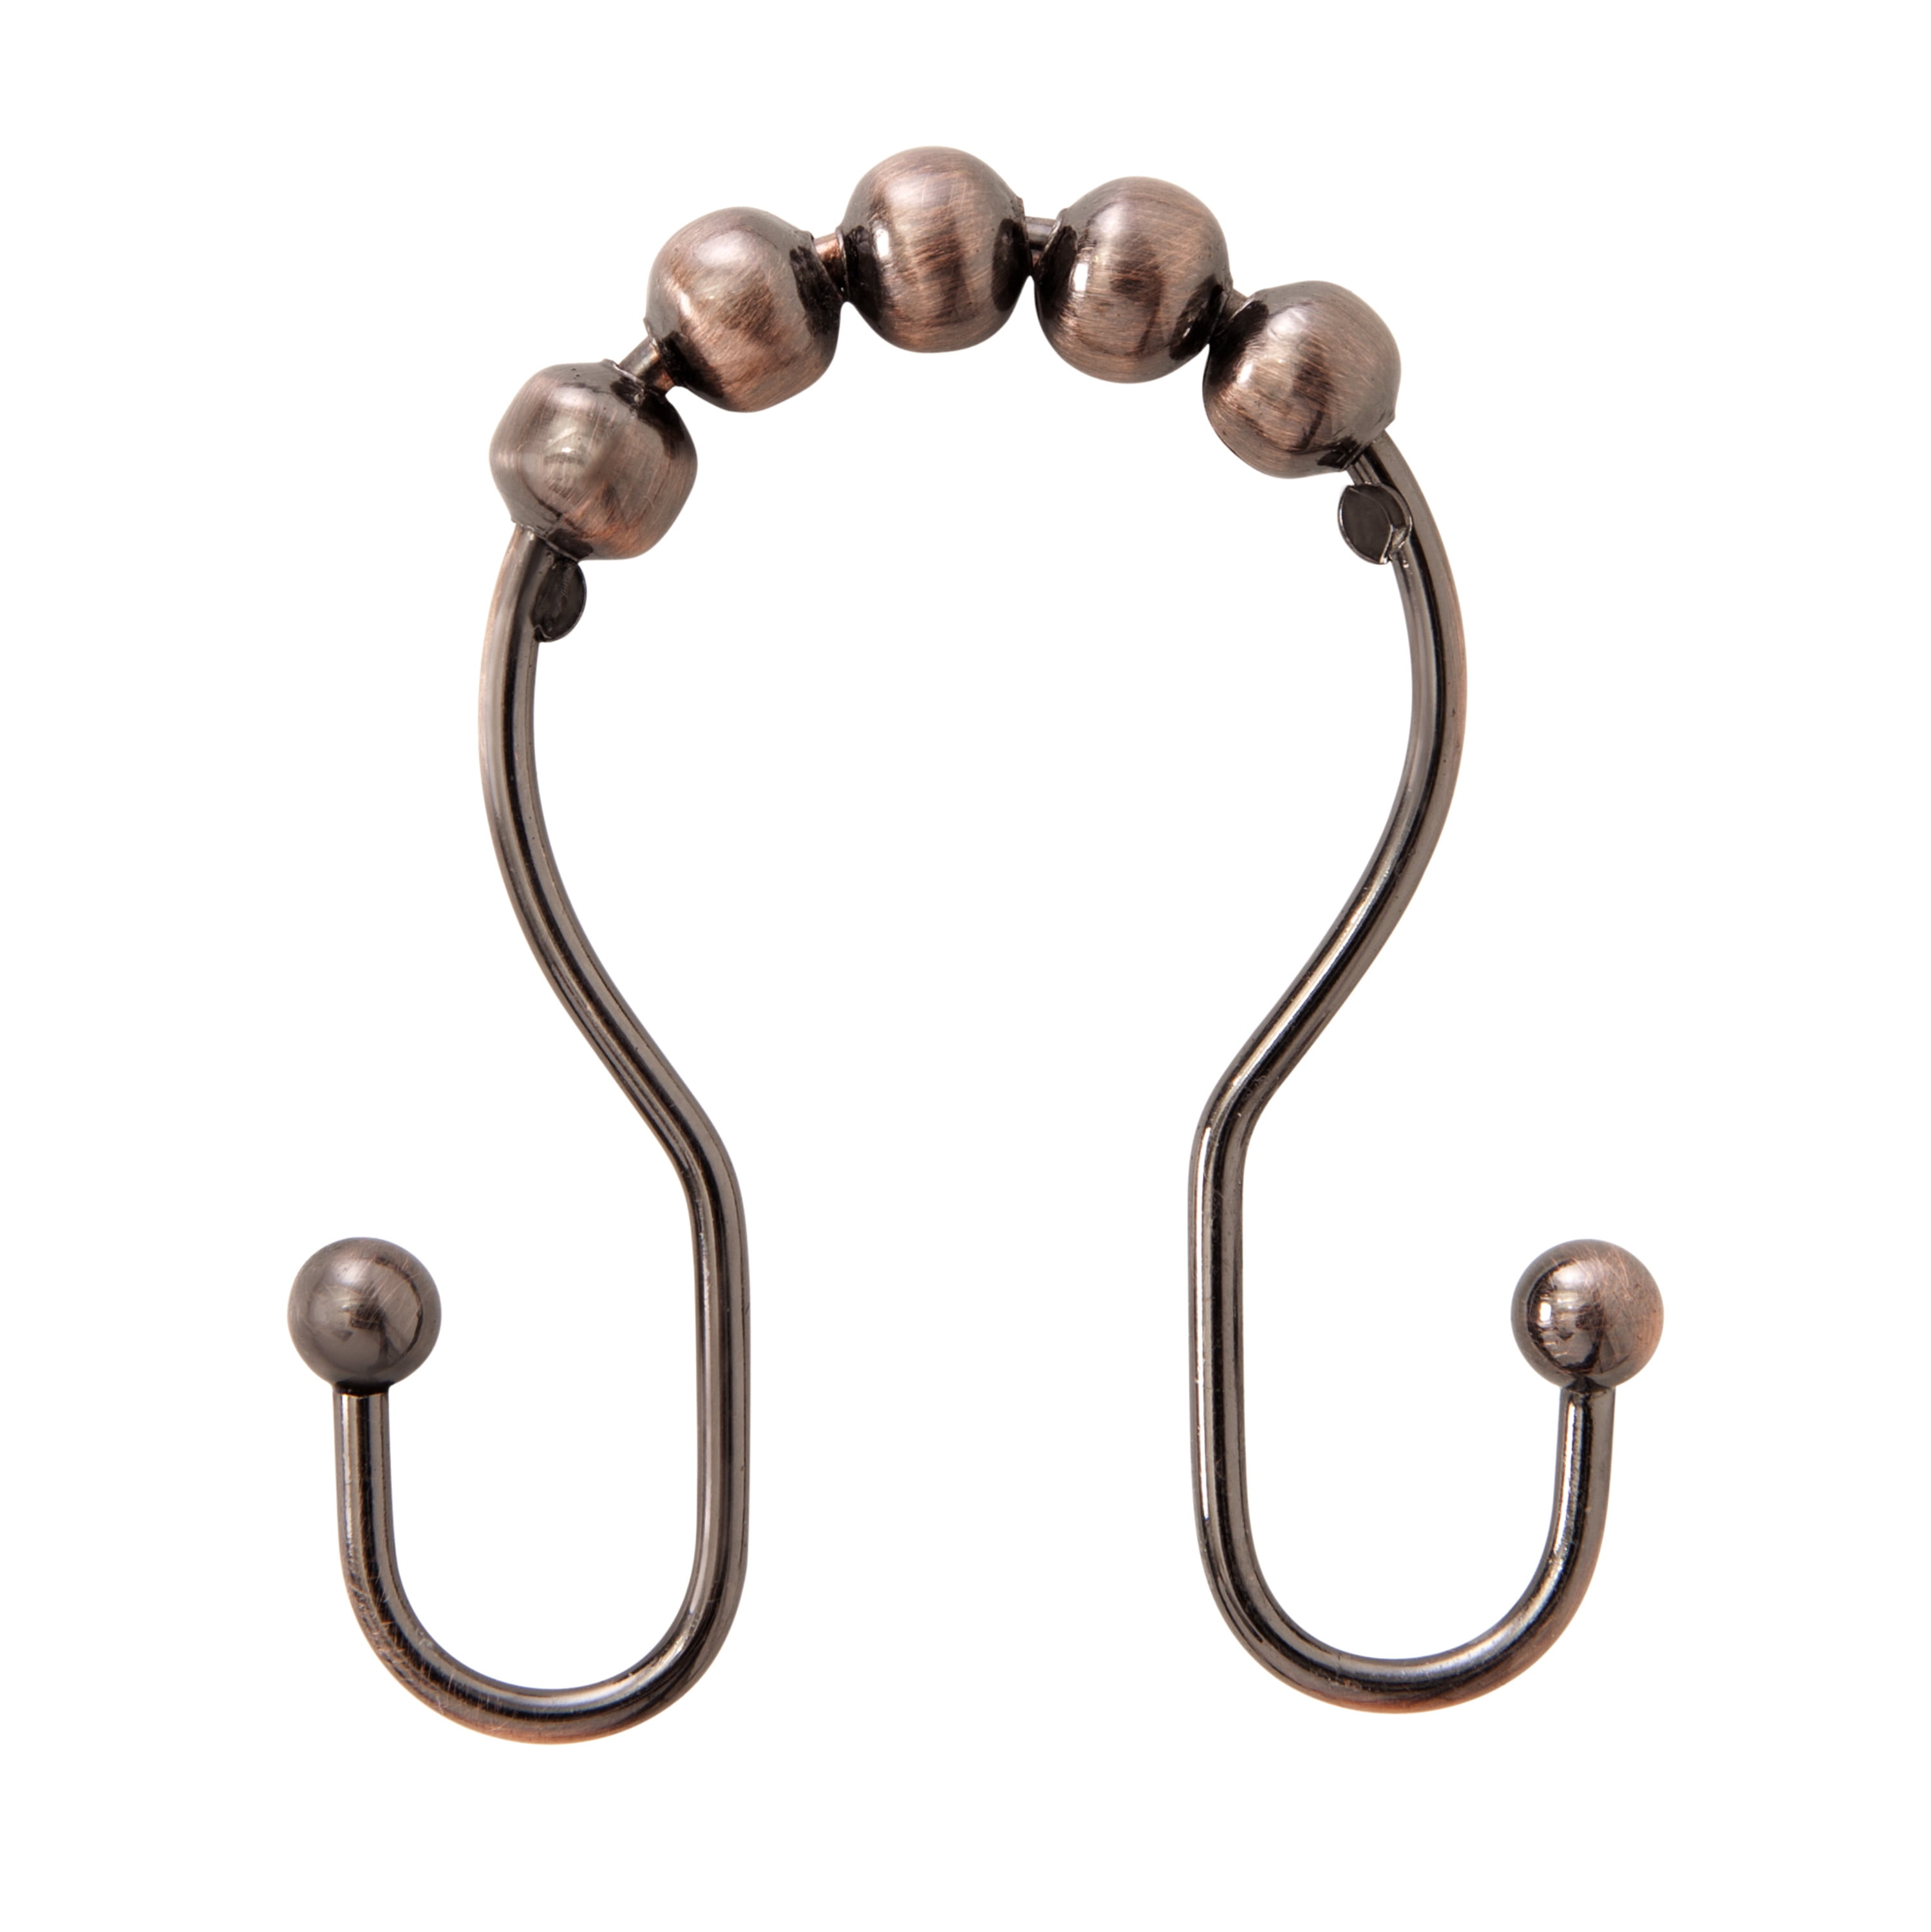 Details about   Maytex Mills Luminex Peyton Glide Shower Curtain Hooks,No Rust Oil-Rubbed Bronze 